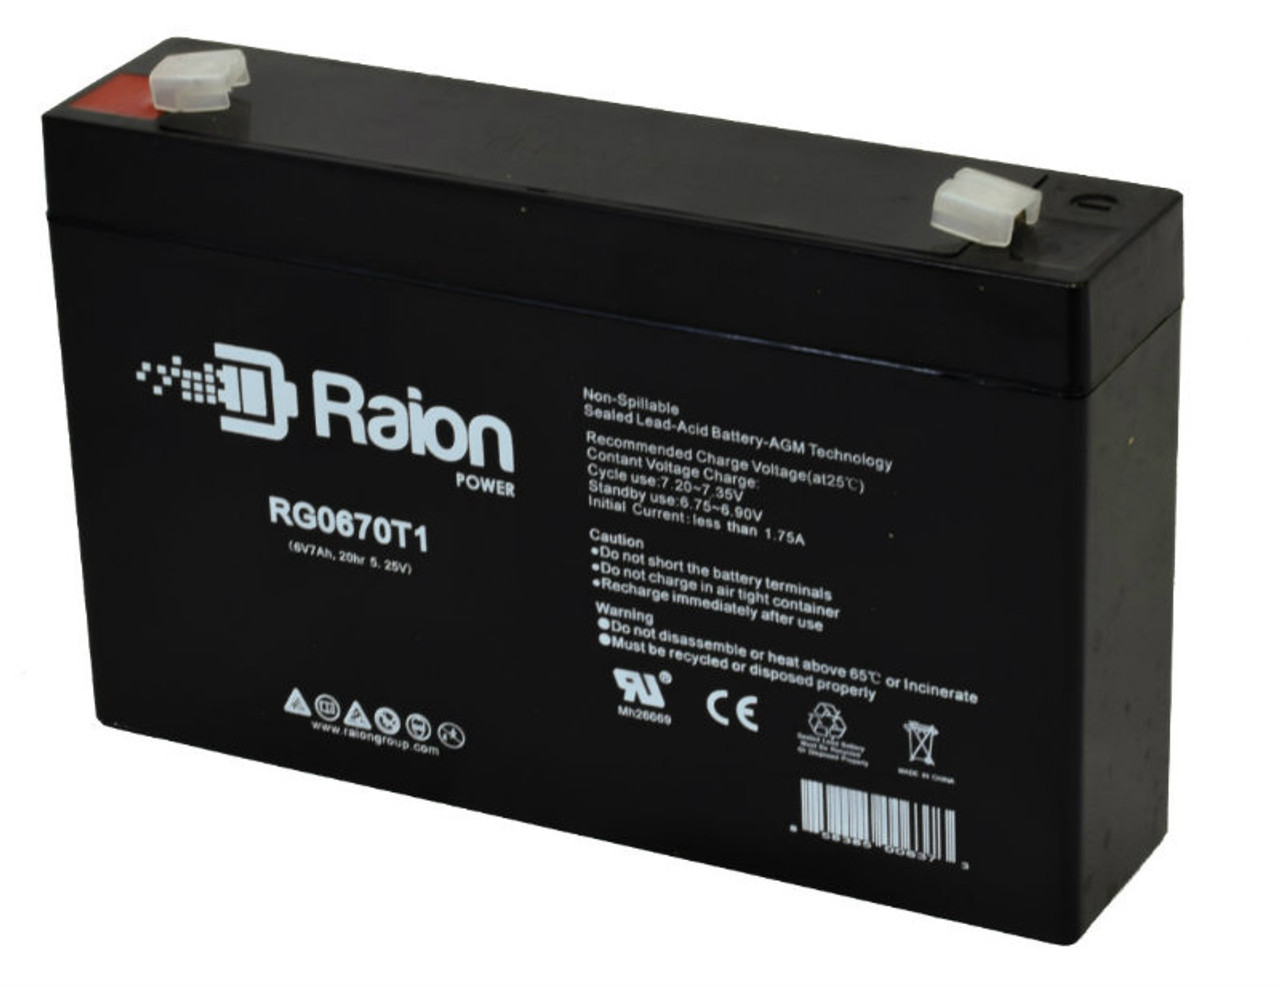 Raion Power RG0670T1 6V 7Ah Replacement Battery Cartridge for Medical Research Lab ECG RECORDER medical equipment